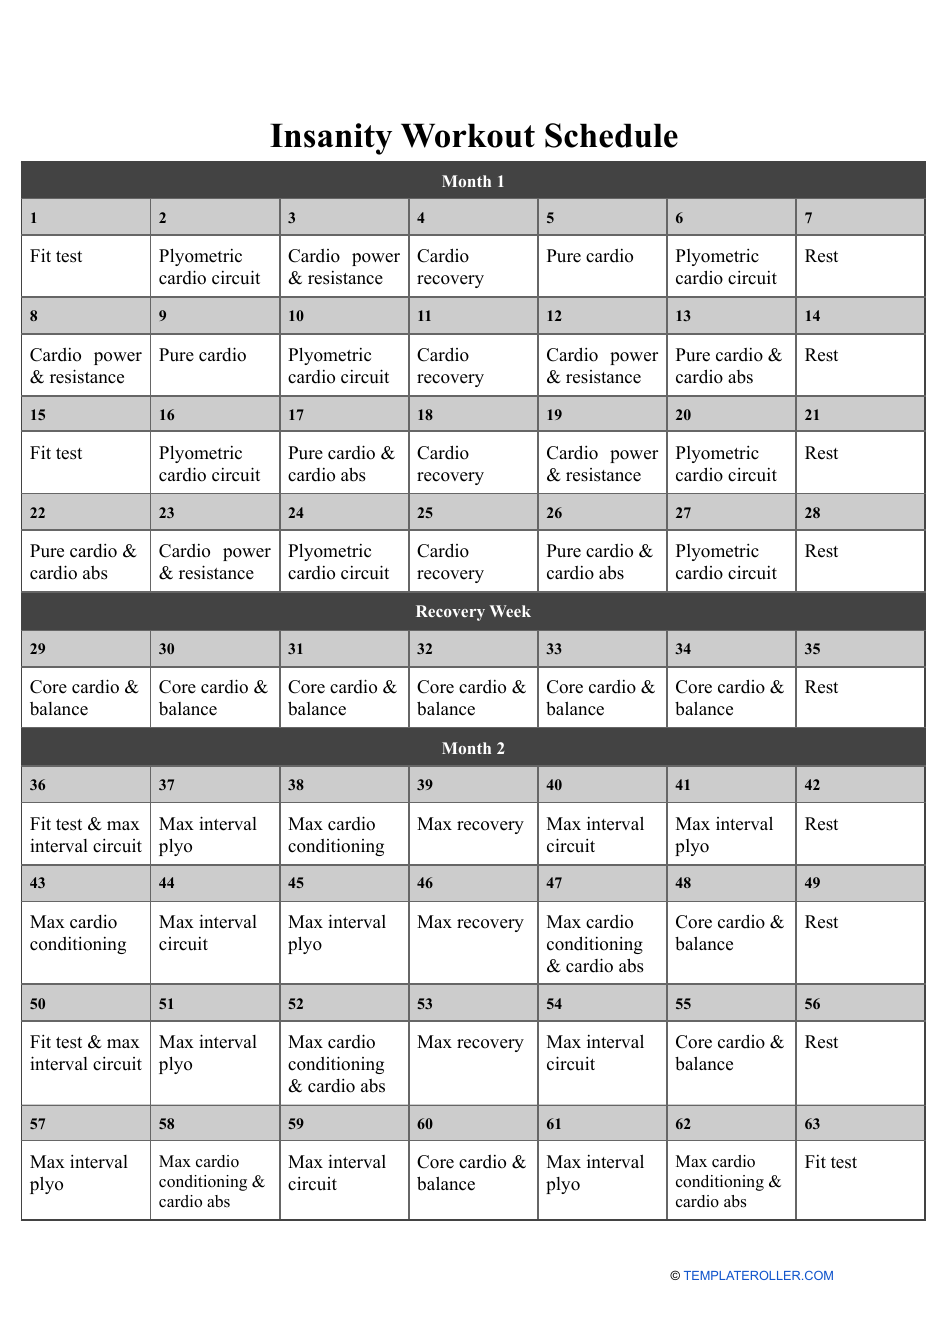 Insanity Workout Schedule Download Printable PDF Templateroller